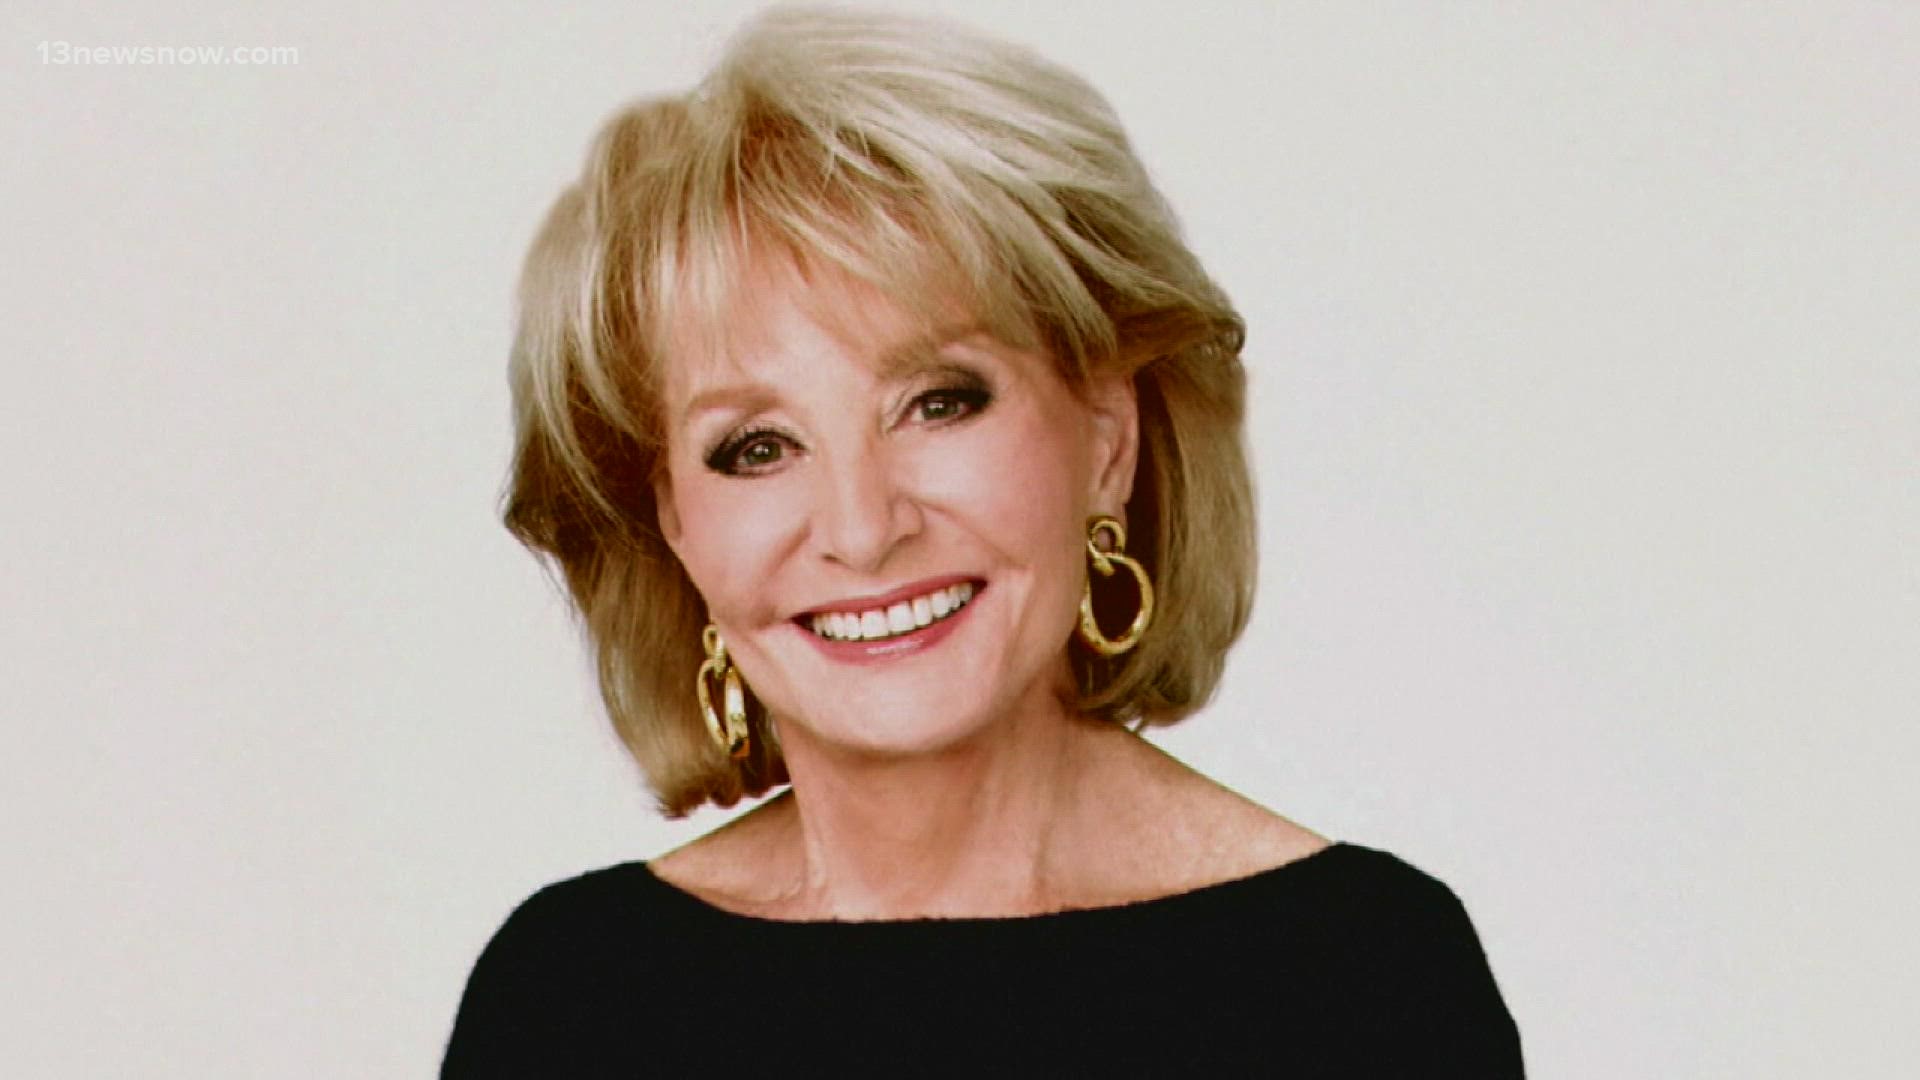 Walters was the first female co-anchor of a network evening news program, launched a beloved daytime talk show and shattered the glass ceiling for women in TV news.